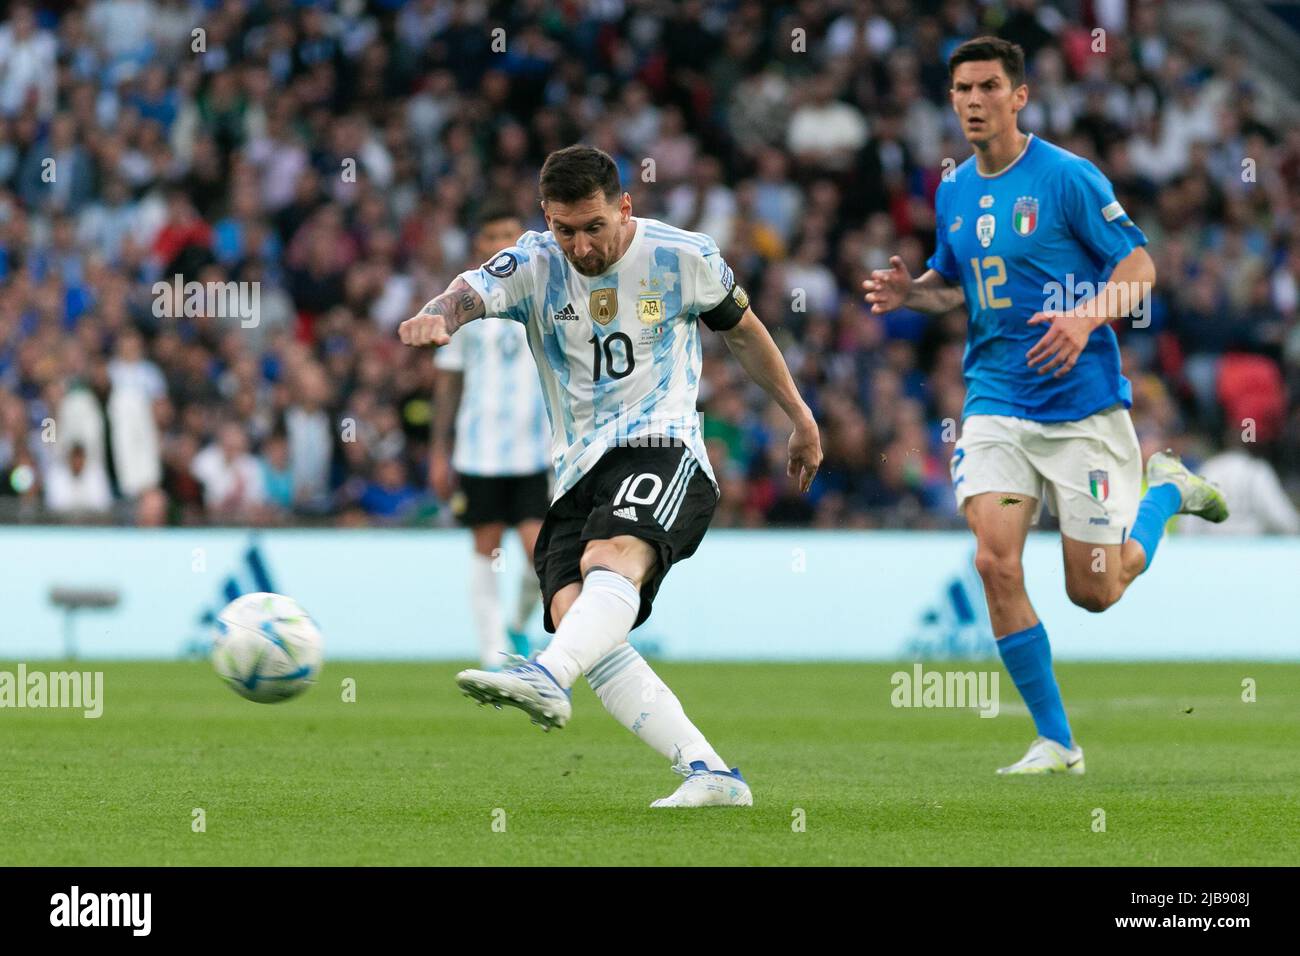 Lionel Messi (c) of Argentina strucks the ball during the Italy v Argentina - Finalissima 2022 match at Wembley Stadium on June 1, 2022 in London, England.(MB Media) Stock Photo